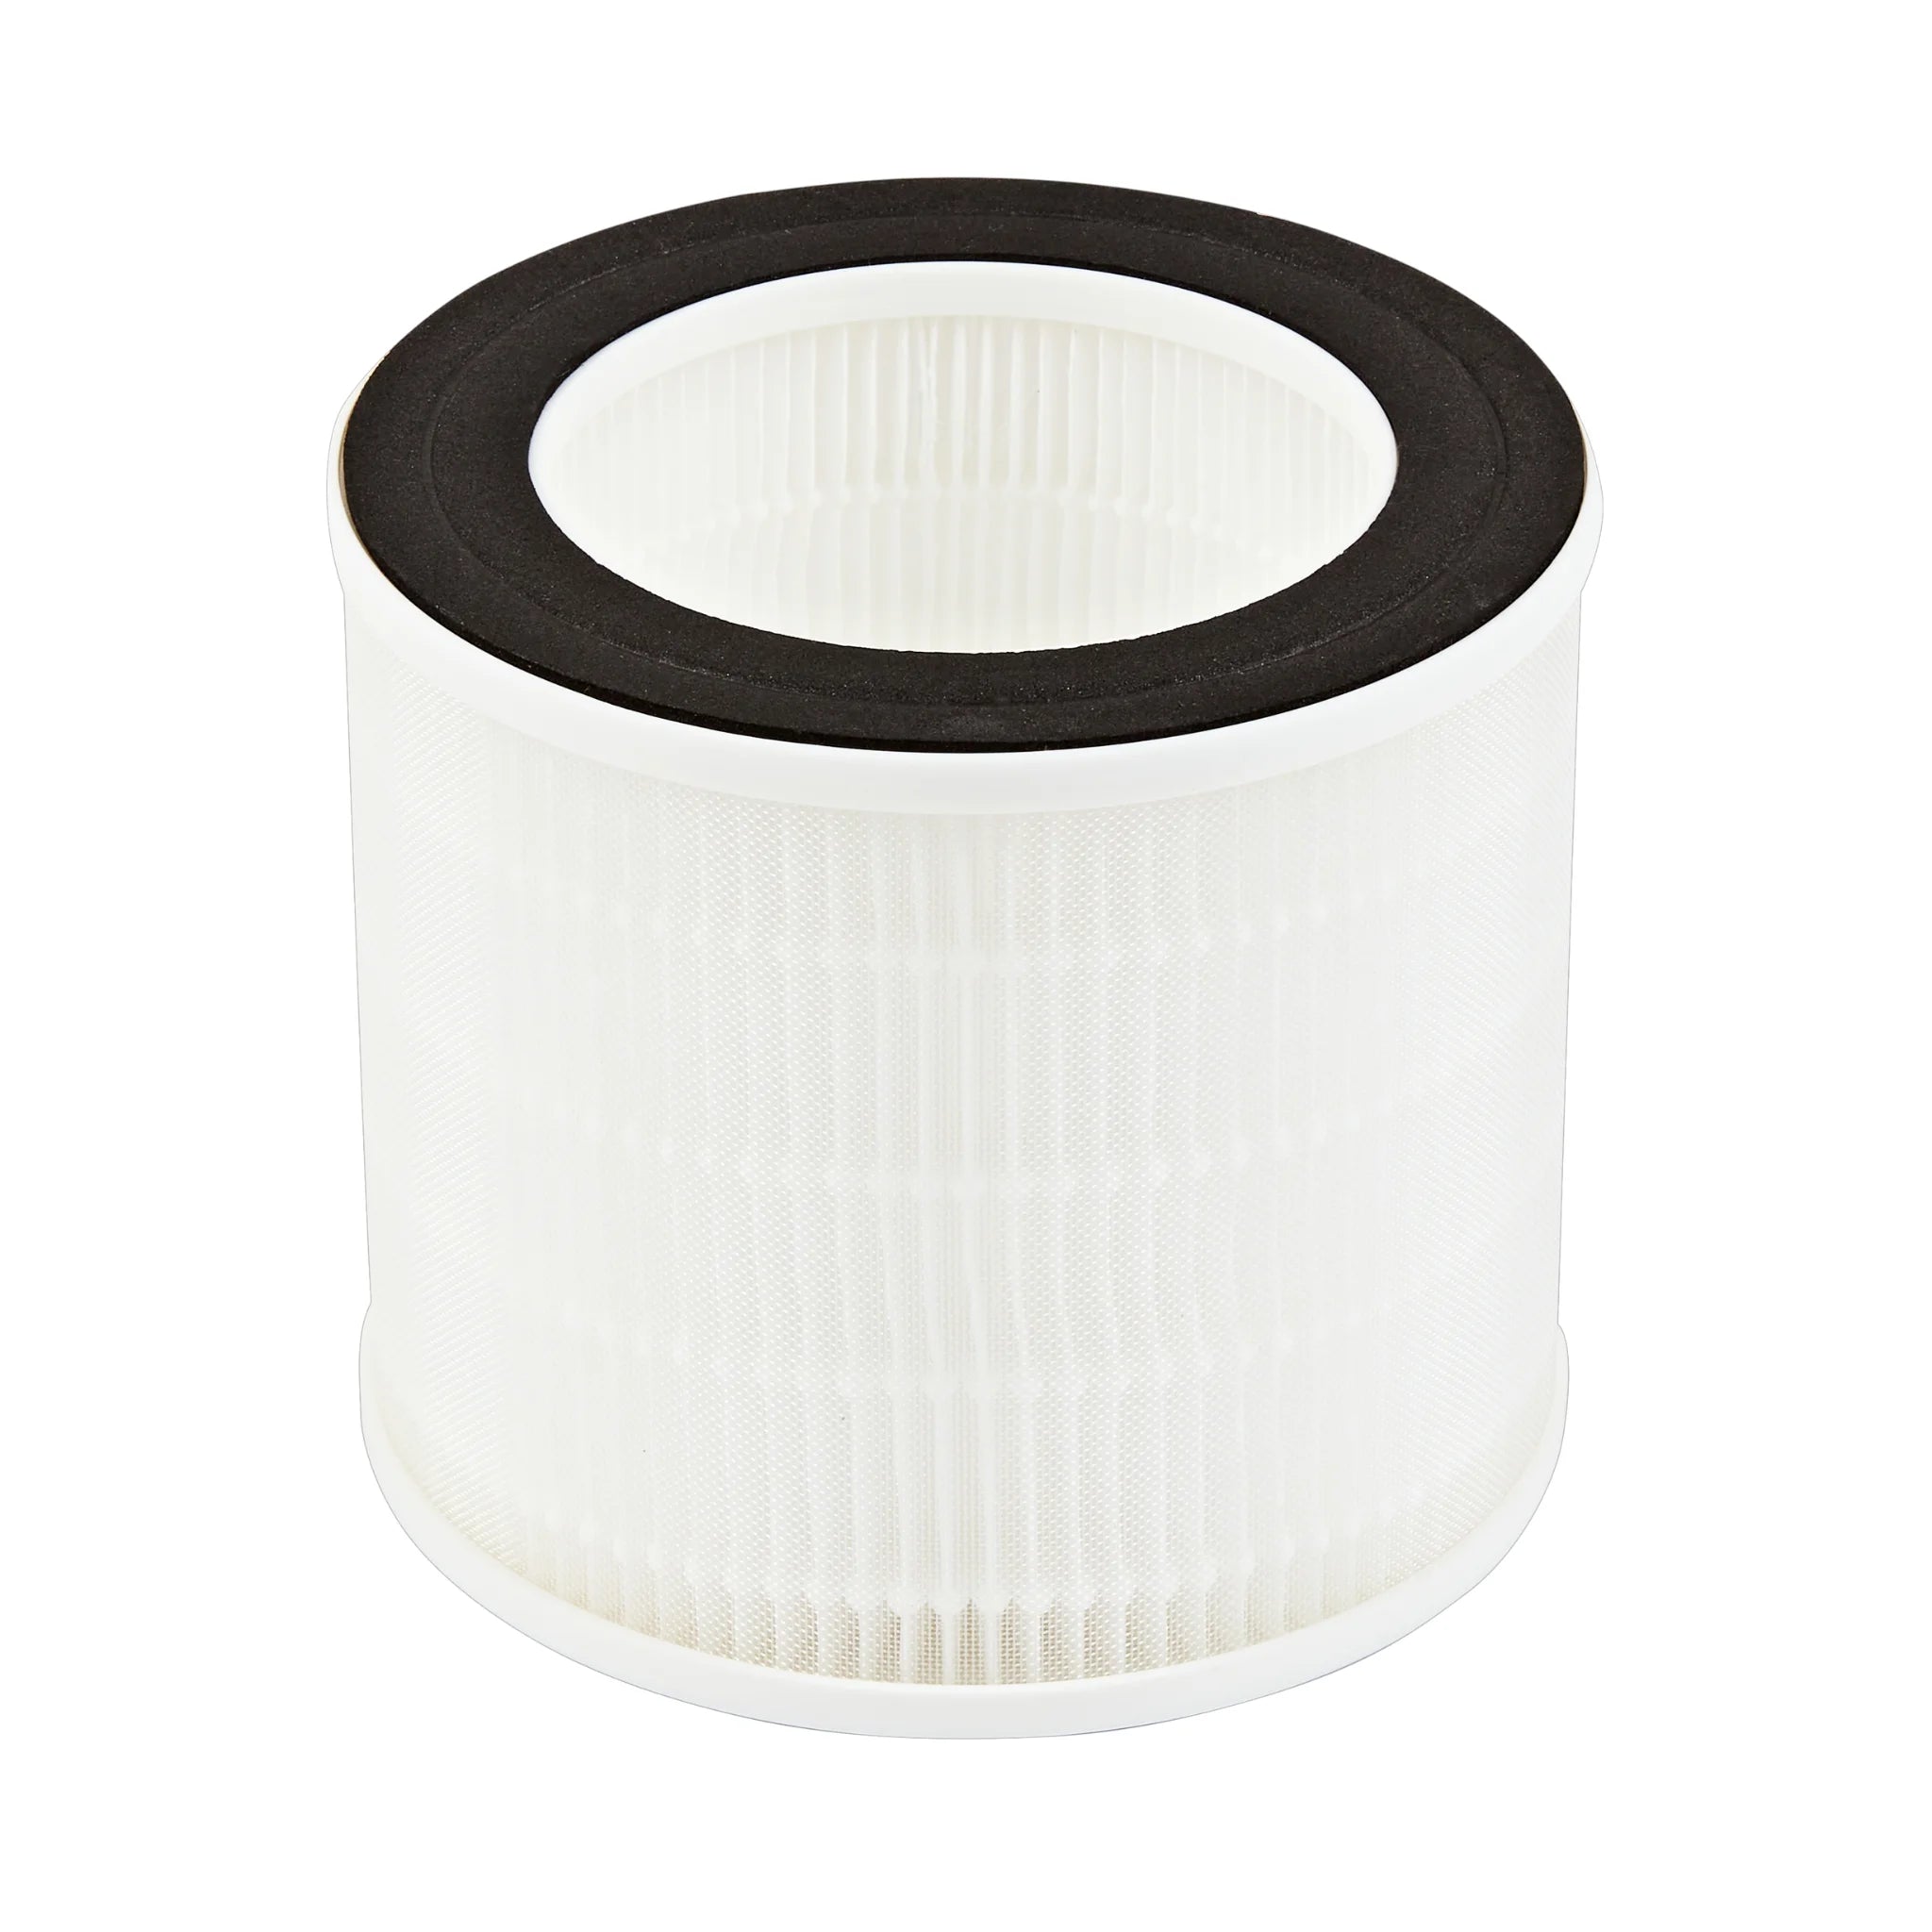 Senelux HEPA Air Purifier replaceable HEPA Filter. Mostly white with black filtration.